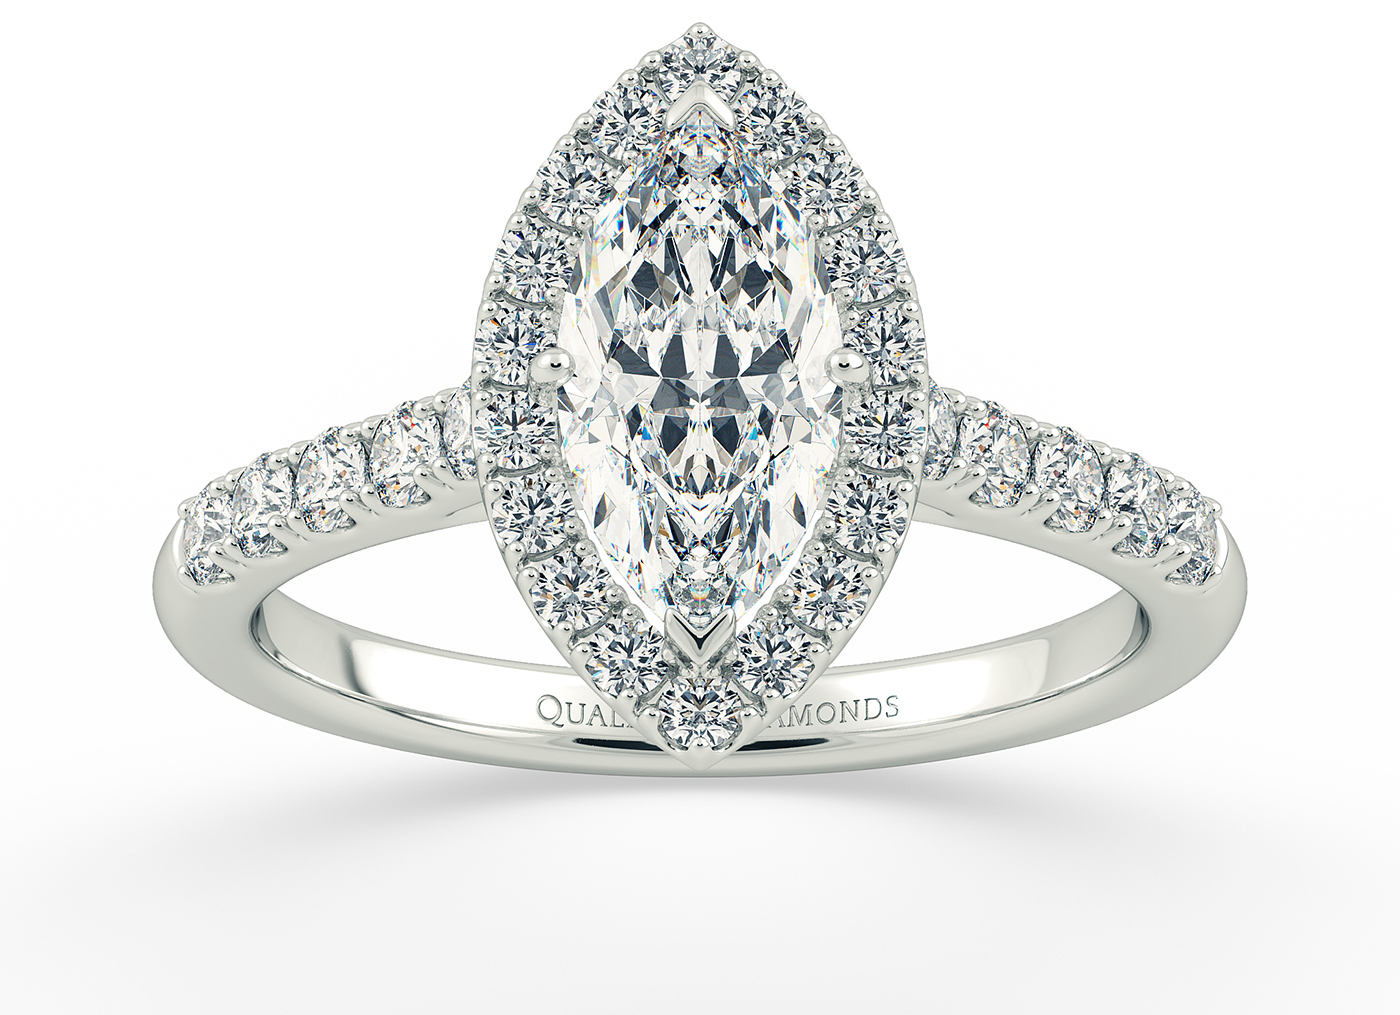 One Carat Marquise Halo Diamond Ring in 9K White Gold